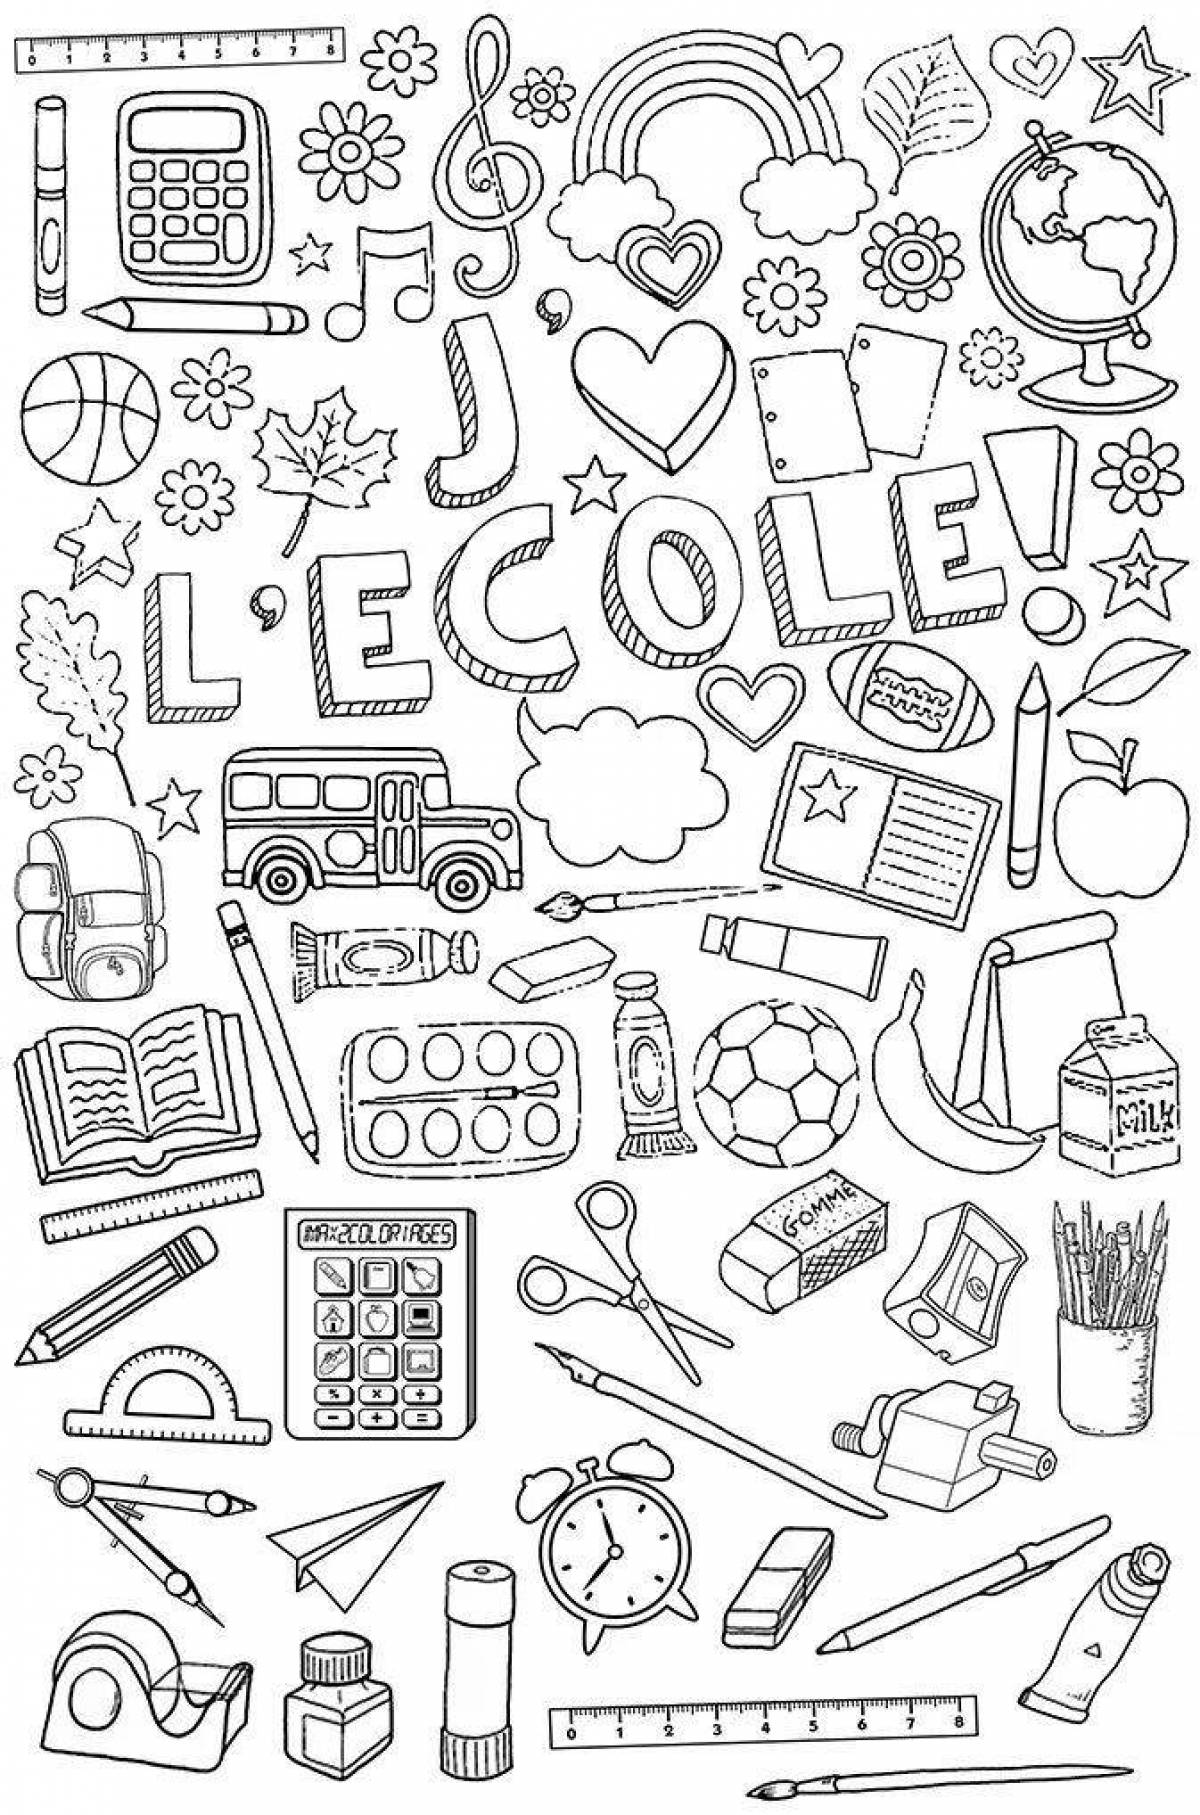 Colorful school supplies coloring page